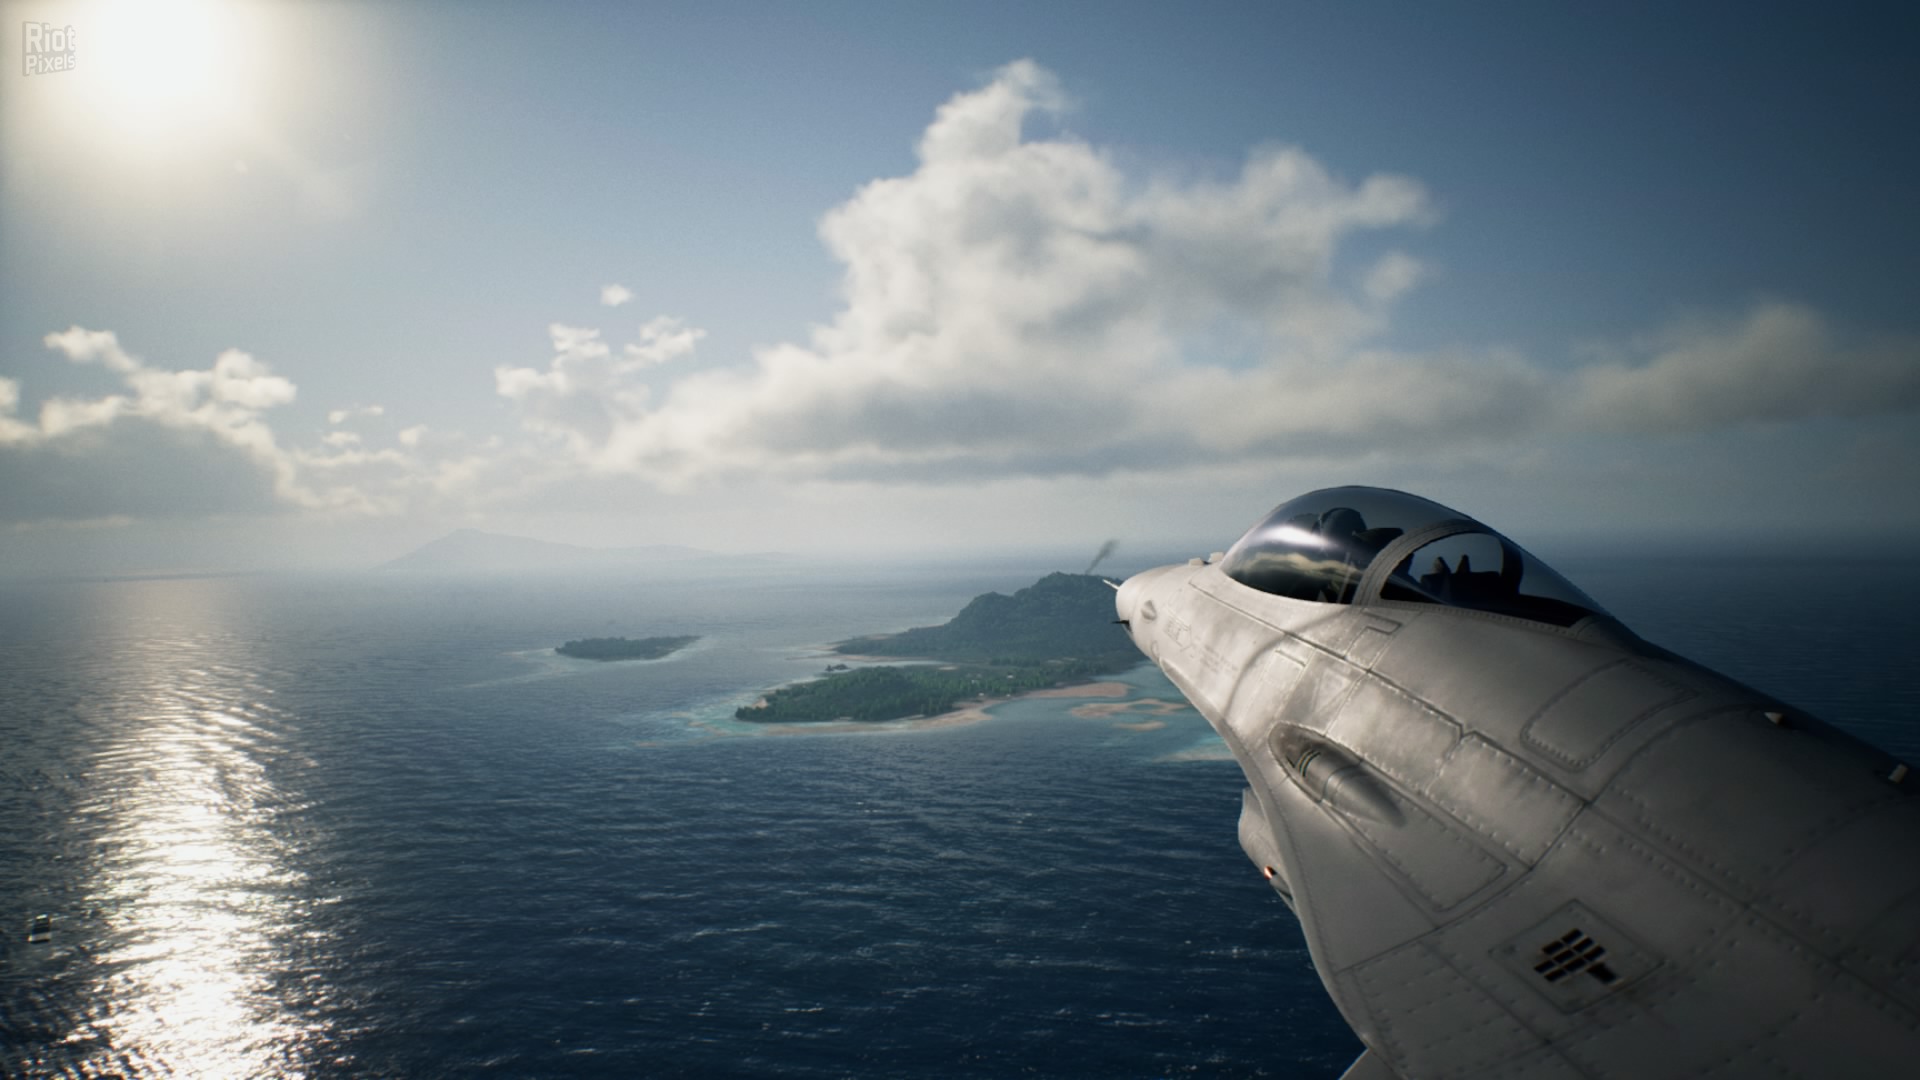 Ace Combat 7: Skies Unknown - game screenshots at Riot Pixels, images